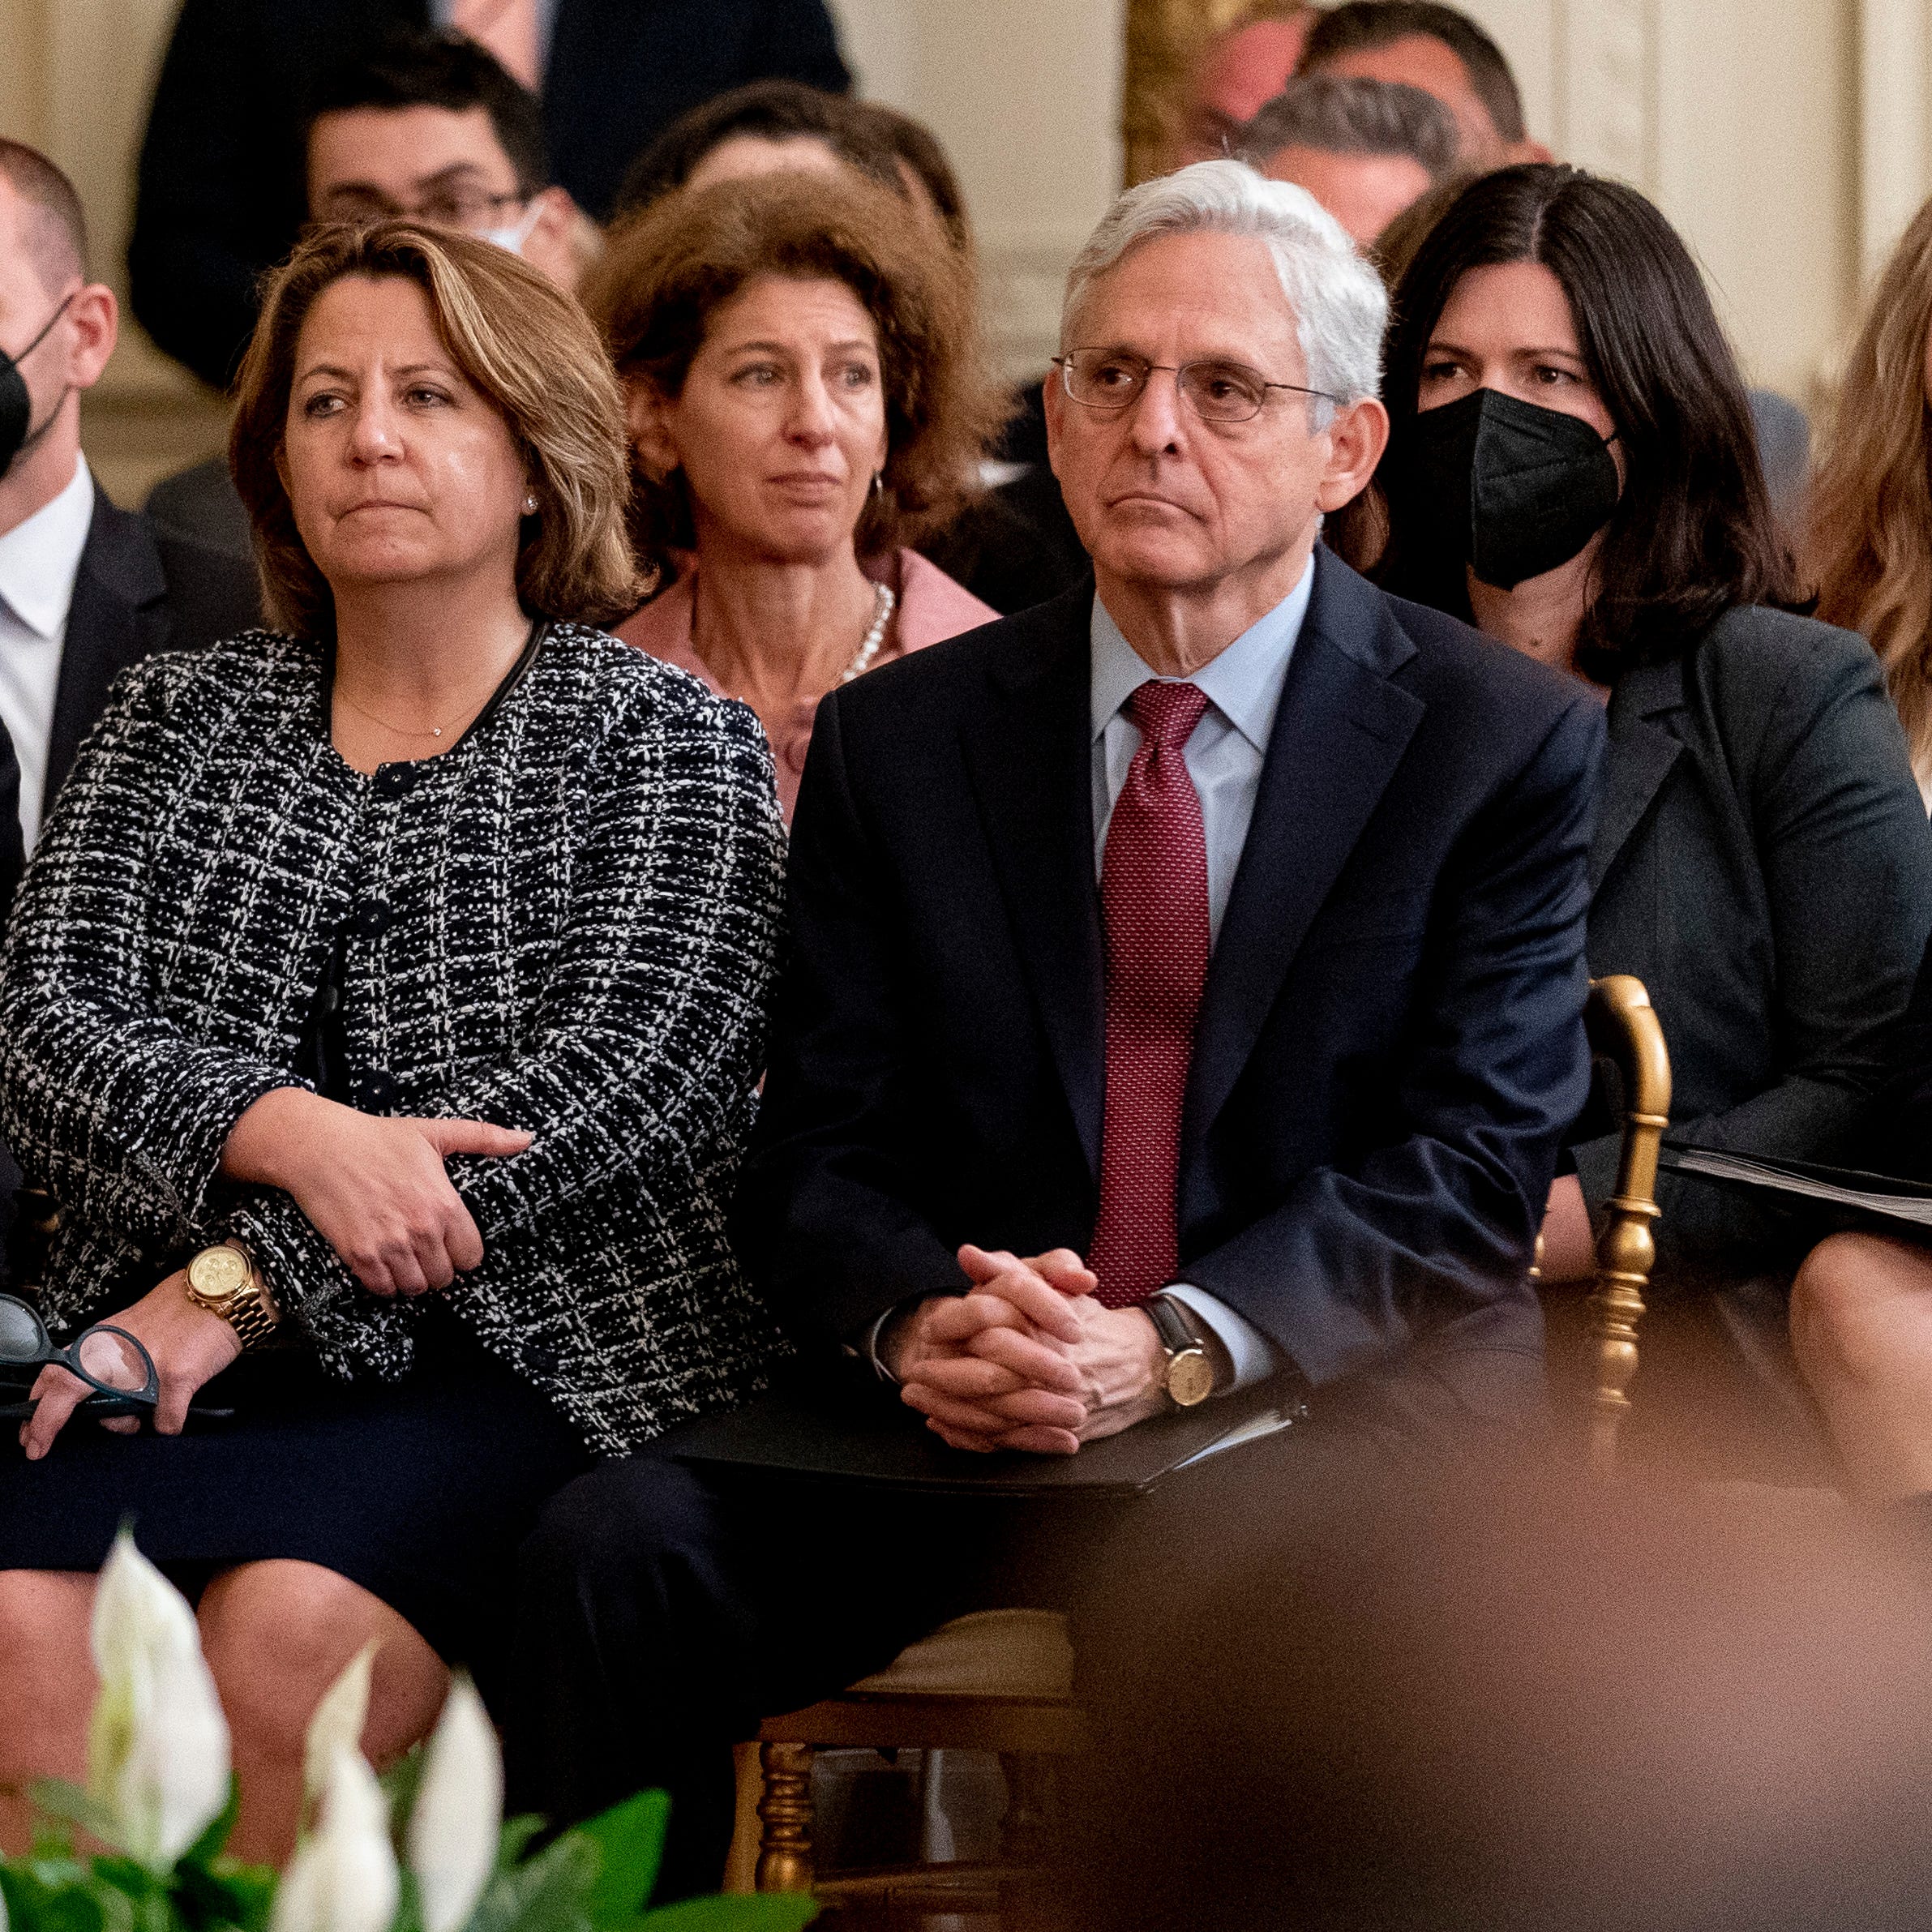 Attorney General Merrick Garland, right, accompanied by Deputy Attorney General Lisa Monaco, center left, listen as President Joe Biden speaks during a Public Safety Officer Medal of Valor event in the East Room of the White House, Monday, May 16, 2022, in Washington. (AP Photo/Andrew Harnik) ORG XMIT: DCAH113